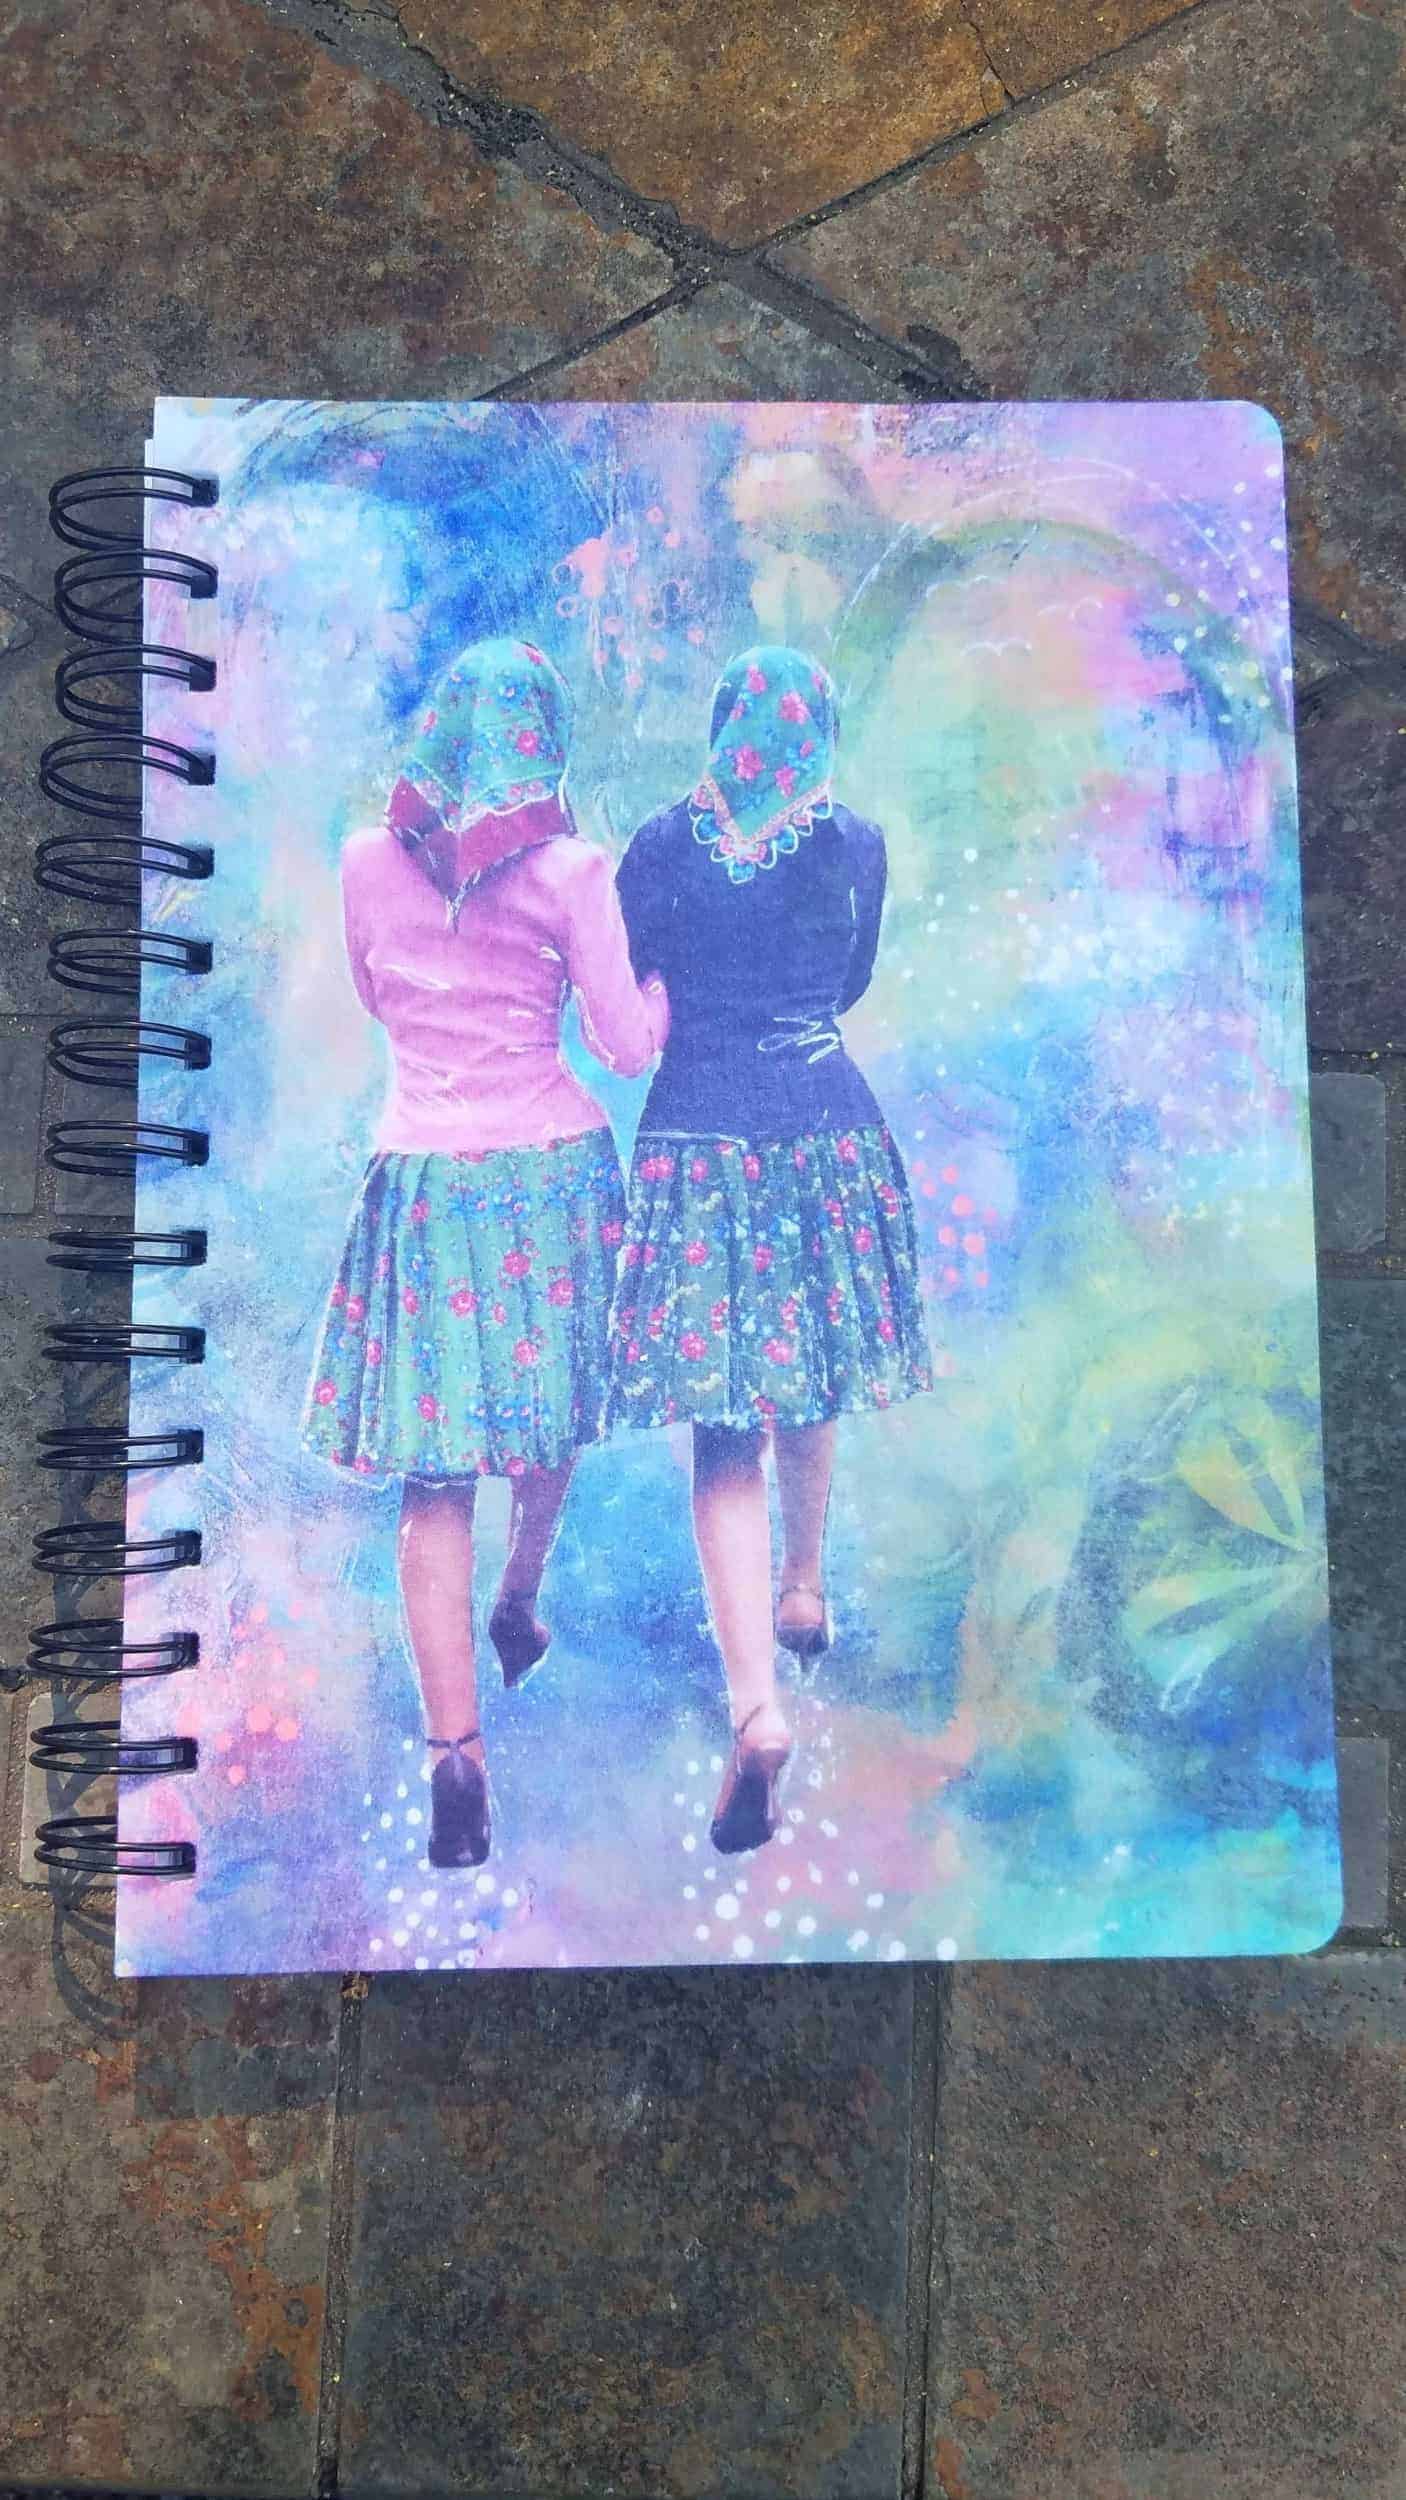 This Let's Take a Walk -  Spiral Bound journal is made with love by Studio Patty D! Shop more unique gift ideas today with Spots Initiatives, the best way to support creators.